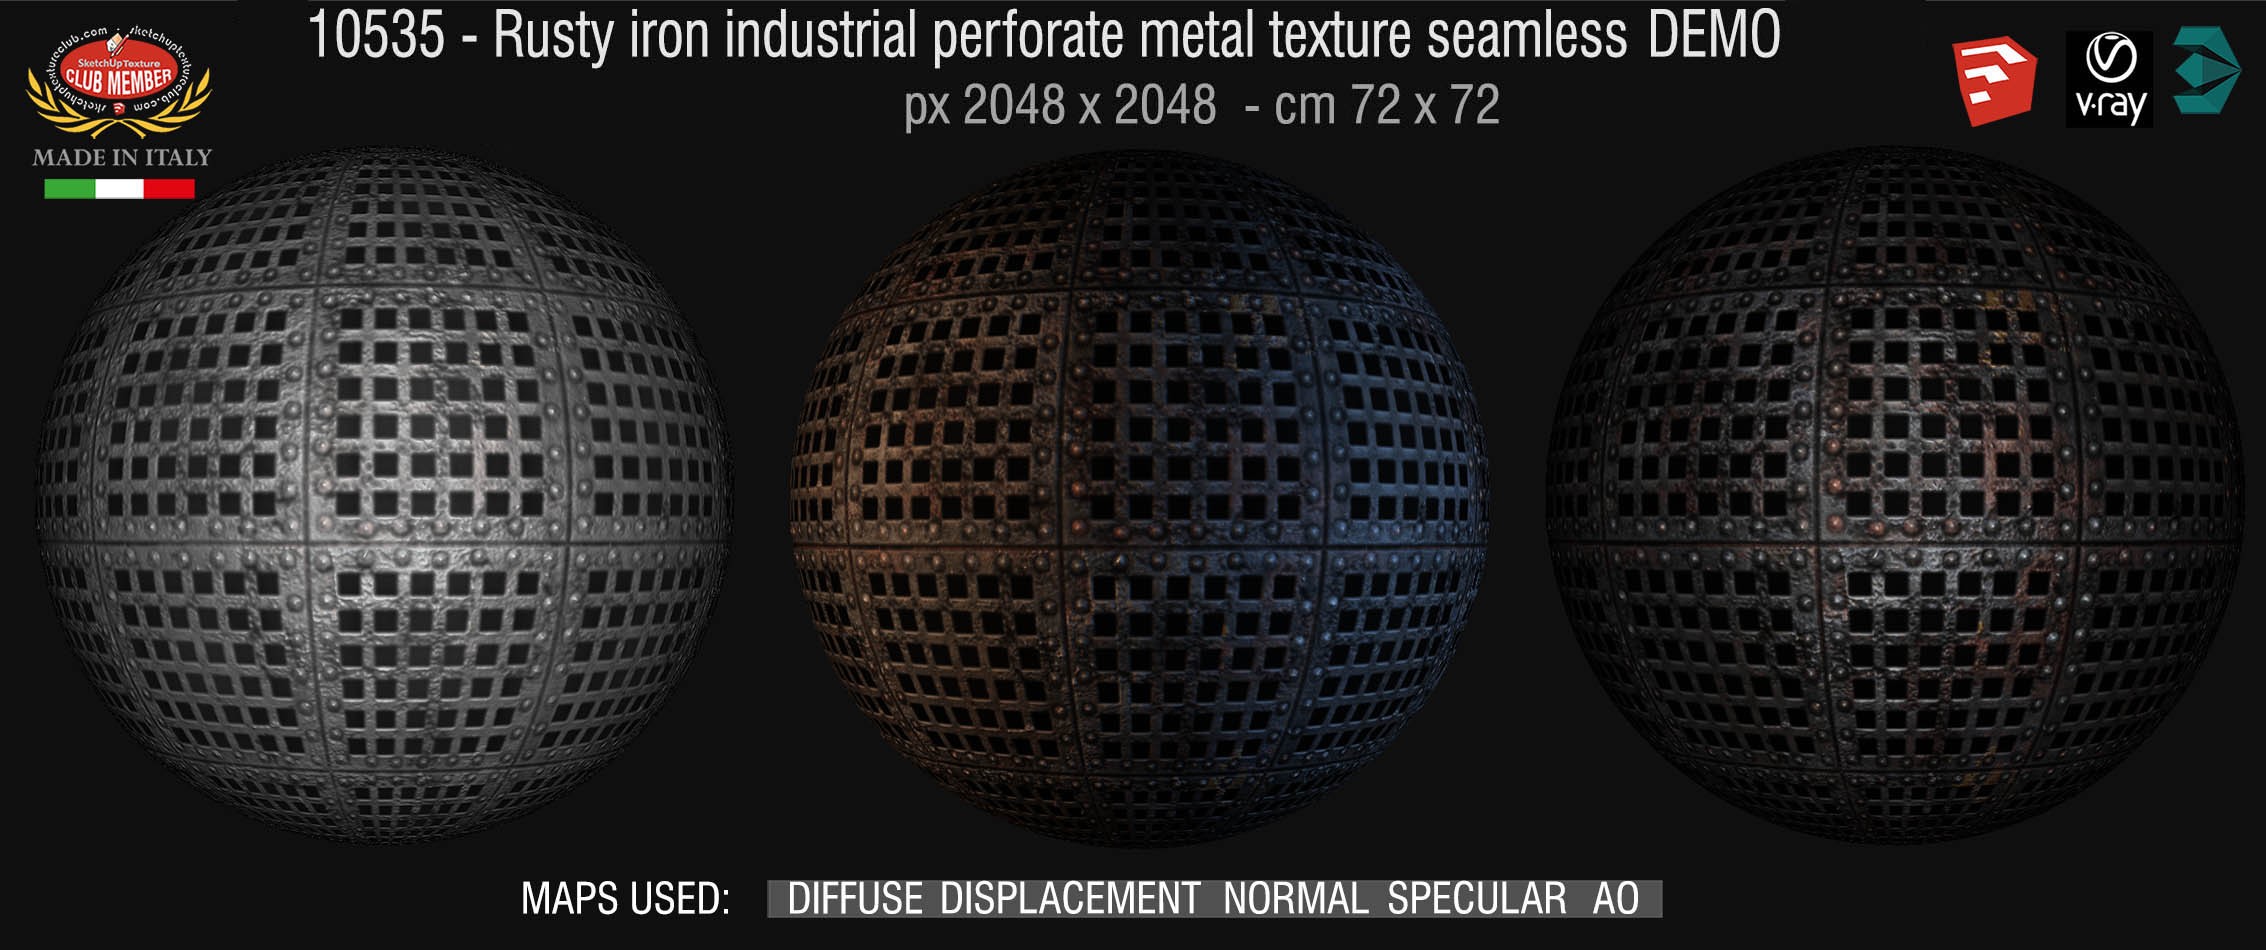 10535 HR Rusty iron industrial perforate metal texture seamless + maps DEMO